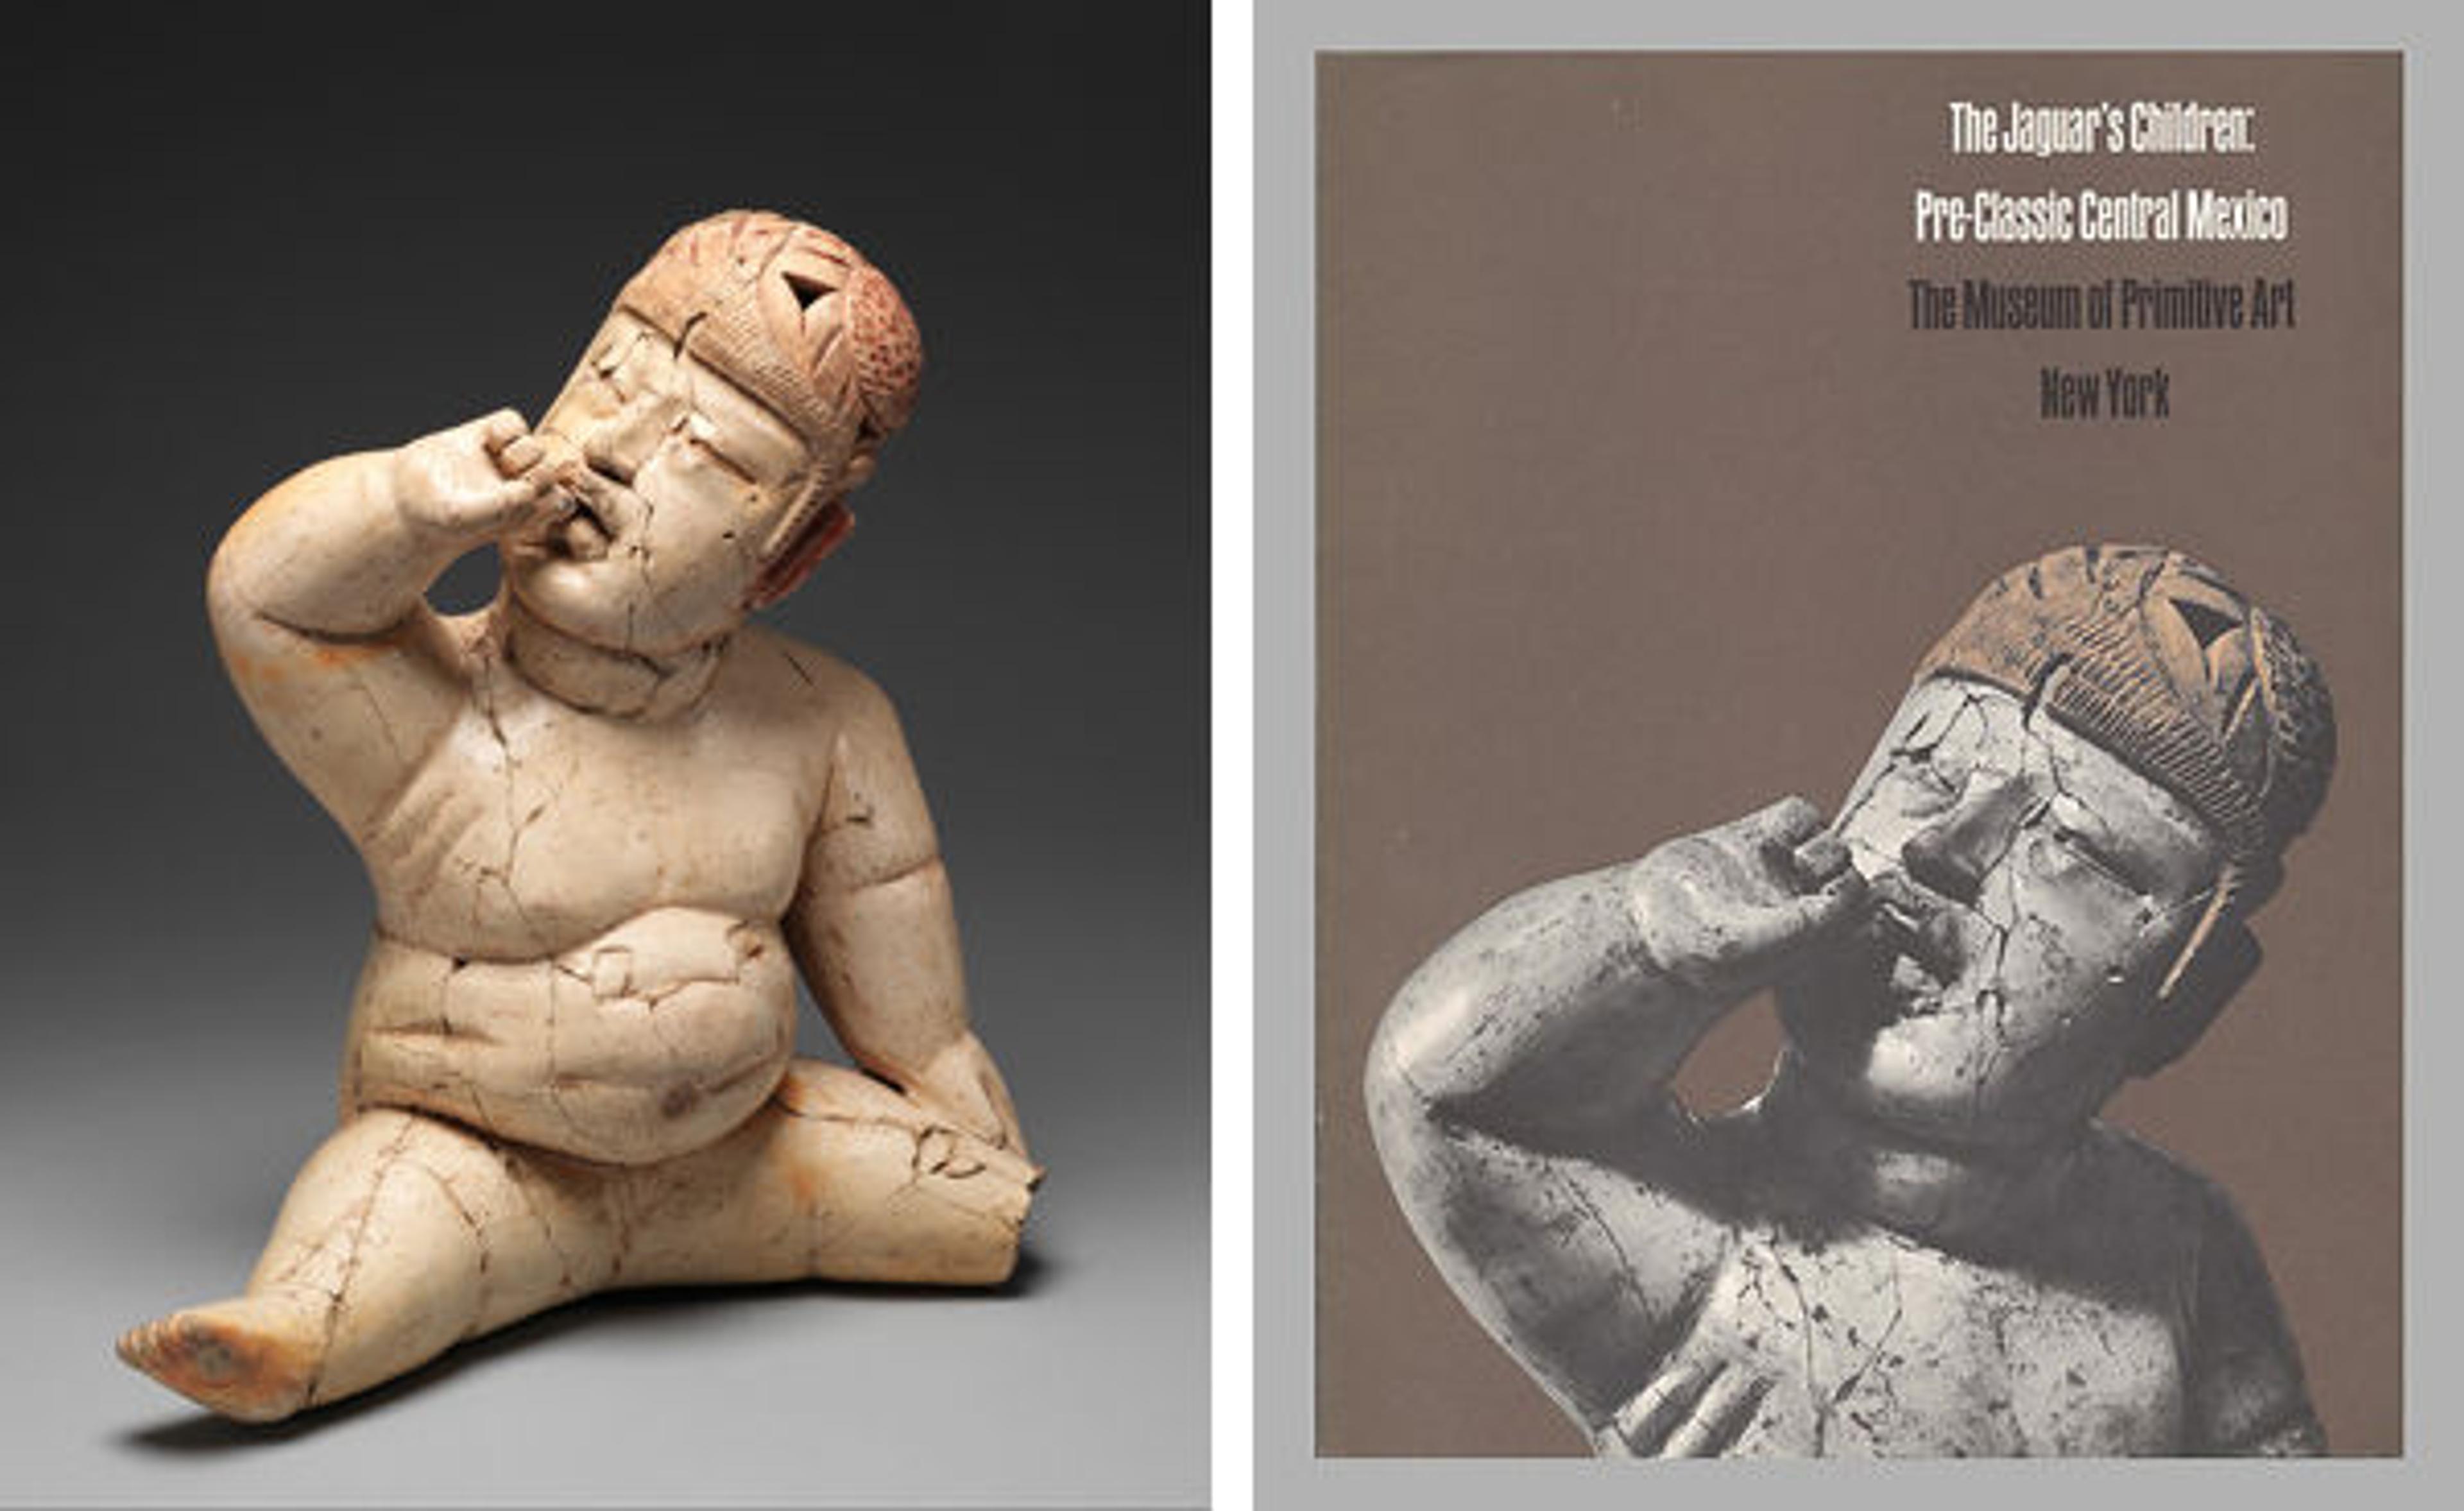 Fig. 1. Seated figure, 12th–9th century B.C. Mexico, Mesoamerica. Olmec. Ceramic, cinnabar, red ochre; H. 13 3/8 x W. 12 1/2 x D. 5 3/4 in. (34 x 31.8 x 14.6 cm). The Metropolitan Museum of Art, New York, The Michael C. Rockefeller Memorial Collection, Bequest of Nelson A. Rockefeller, 1979 (1979.206.1134)